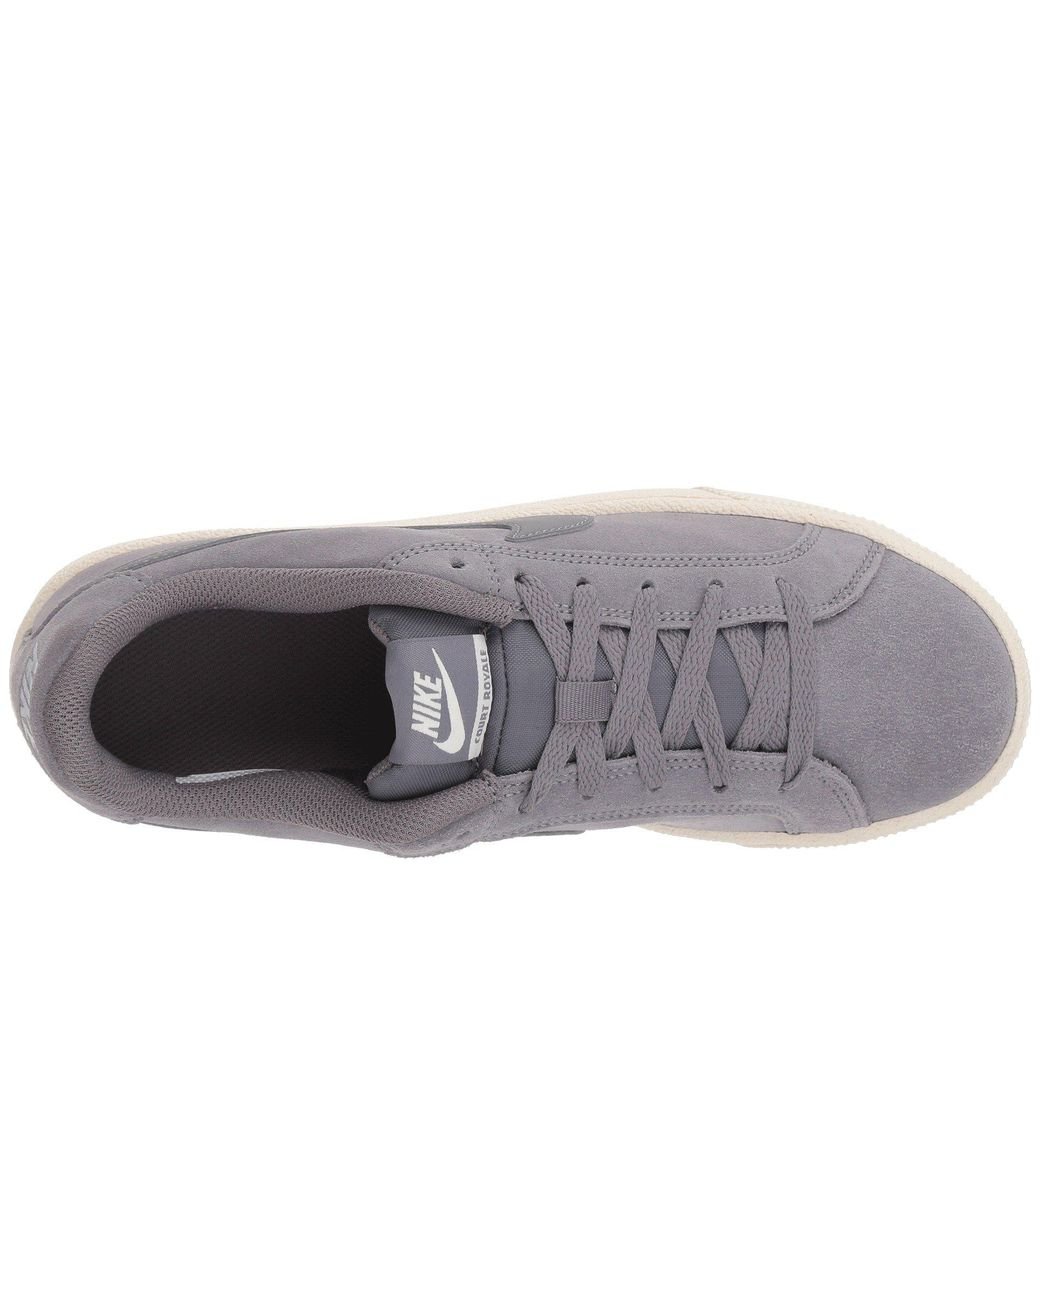 Nike Royale Suede (black/black/thunder Grey) Shoes in Gray | Lyst